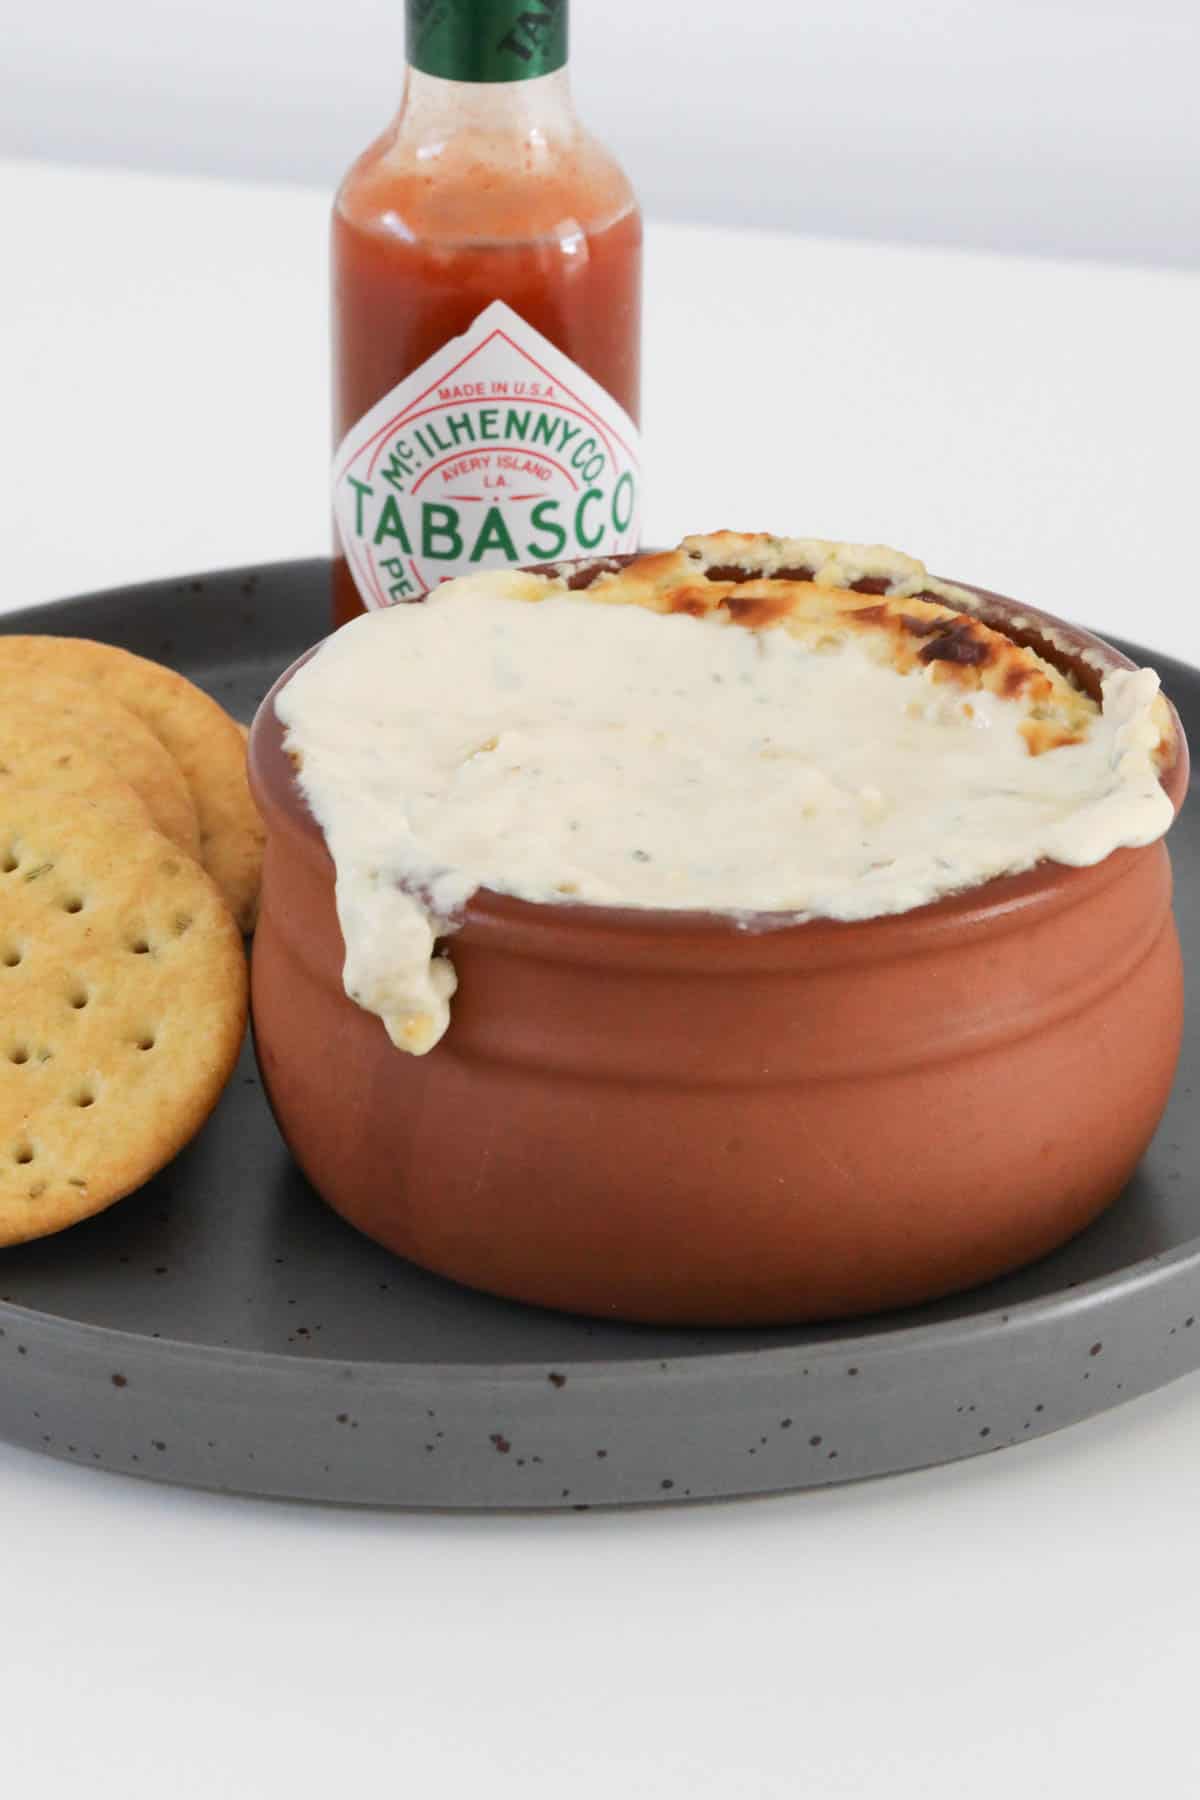 A bottle of Tabasco behind a ramekin filled with warm blue cheese dip.